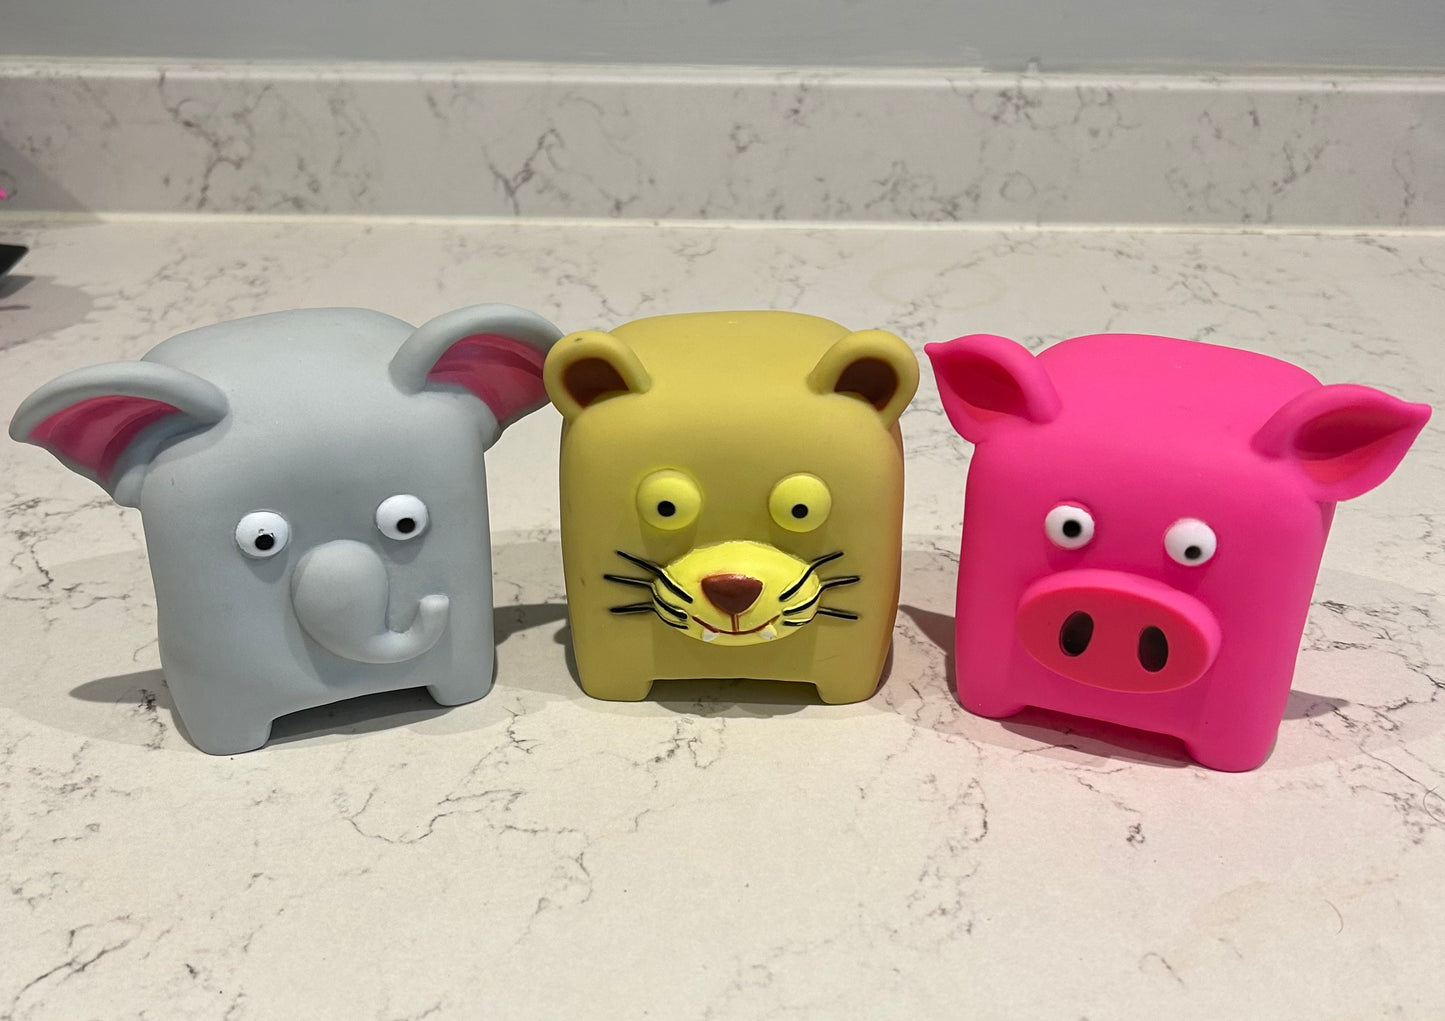 Cube animal squeaky toy